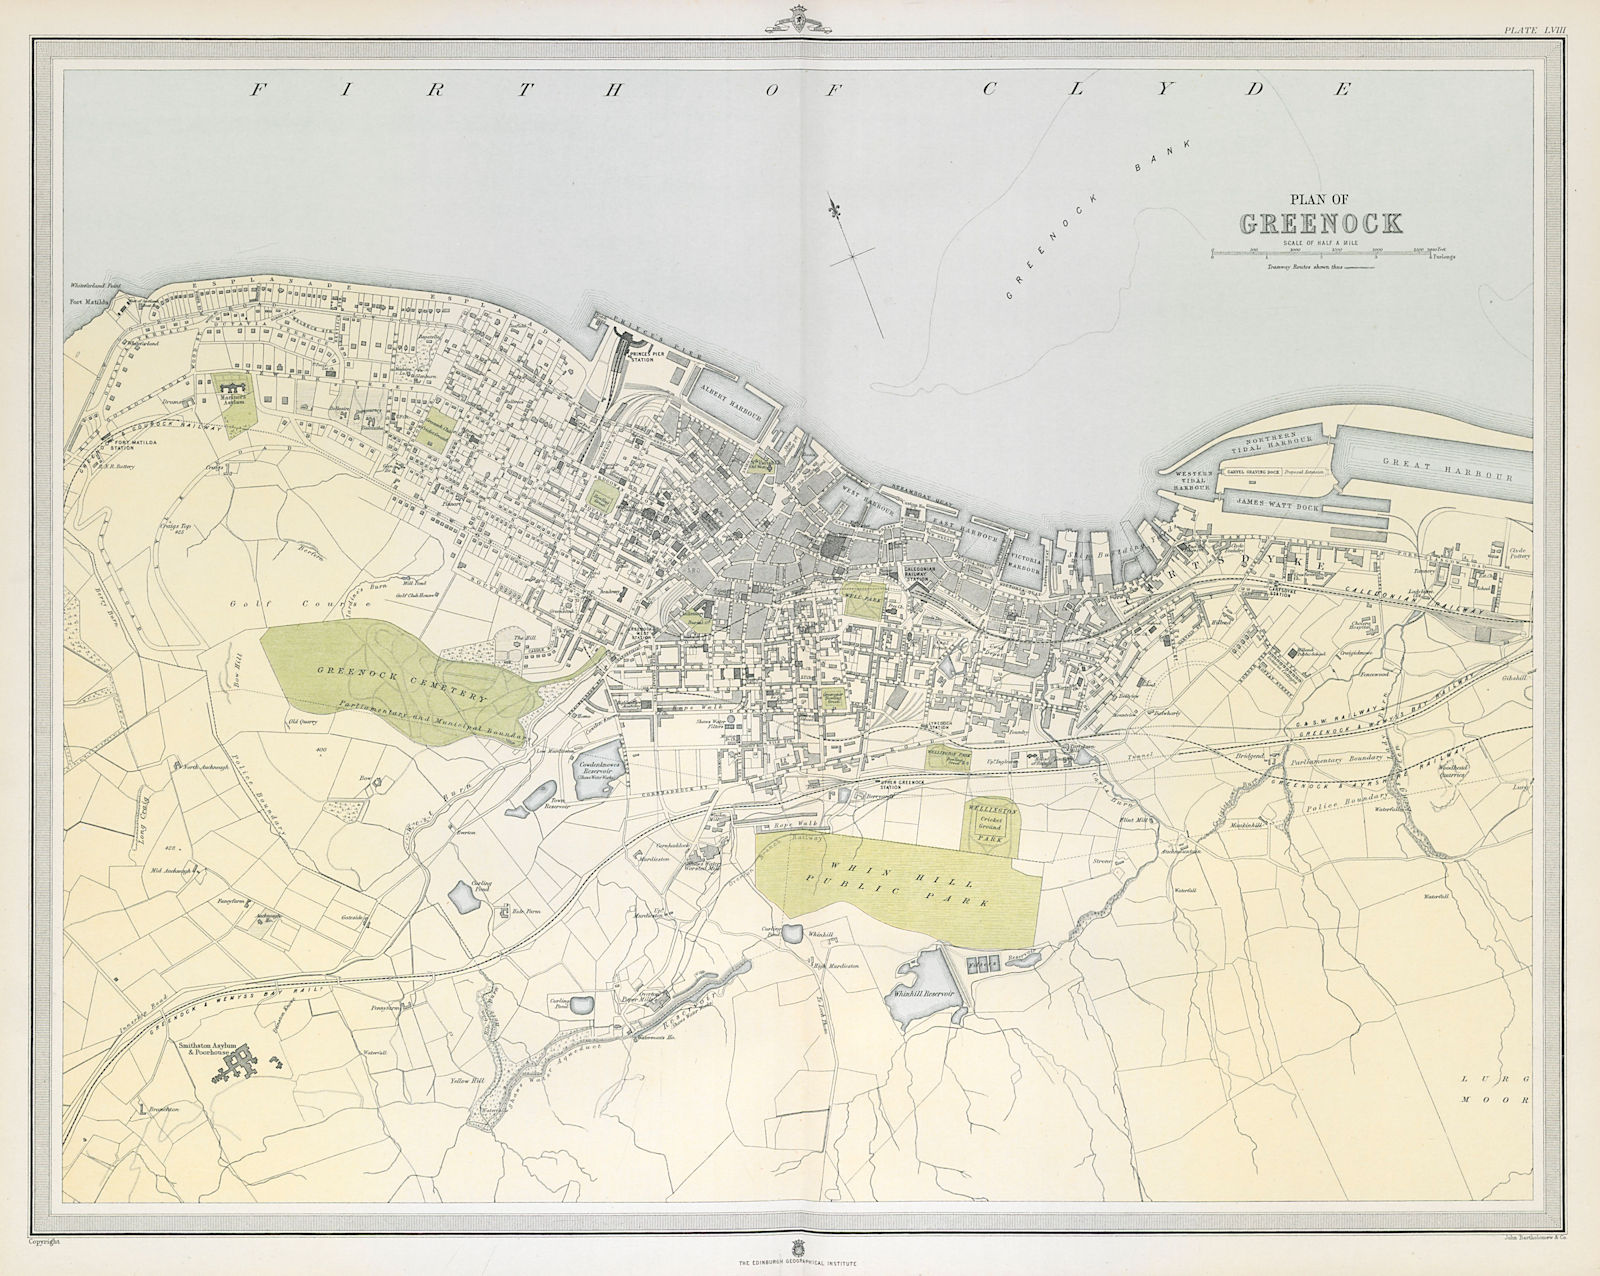 Associate Product Large antique GREENOCK town/city plan. 45 x 55 cm. LARGE 1895 old map